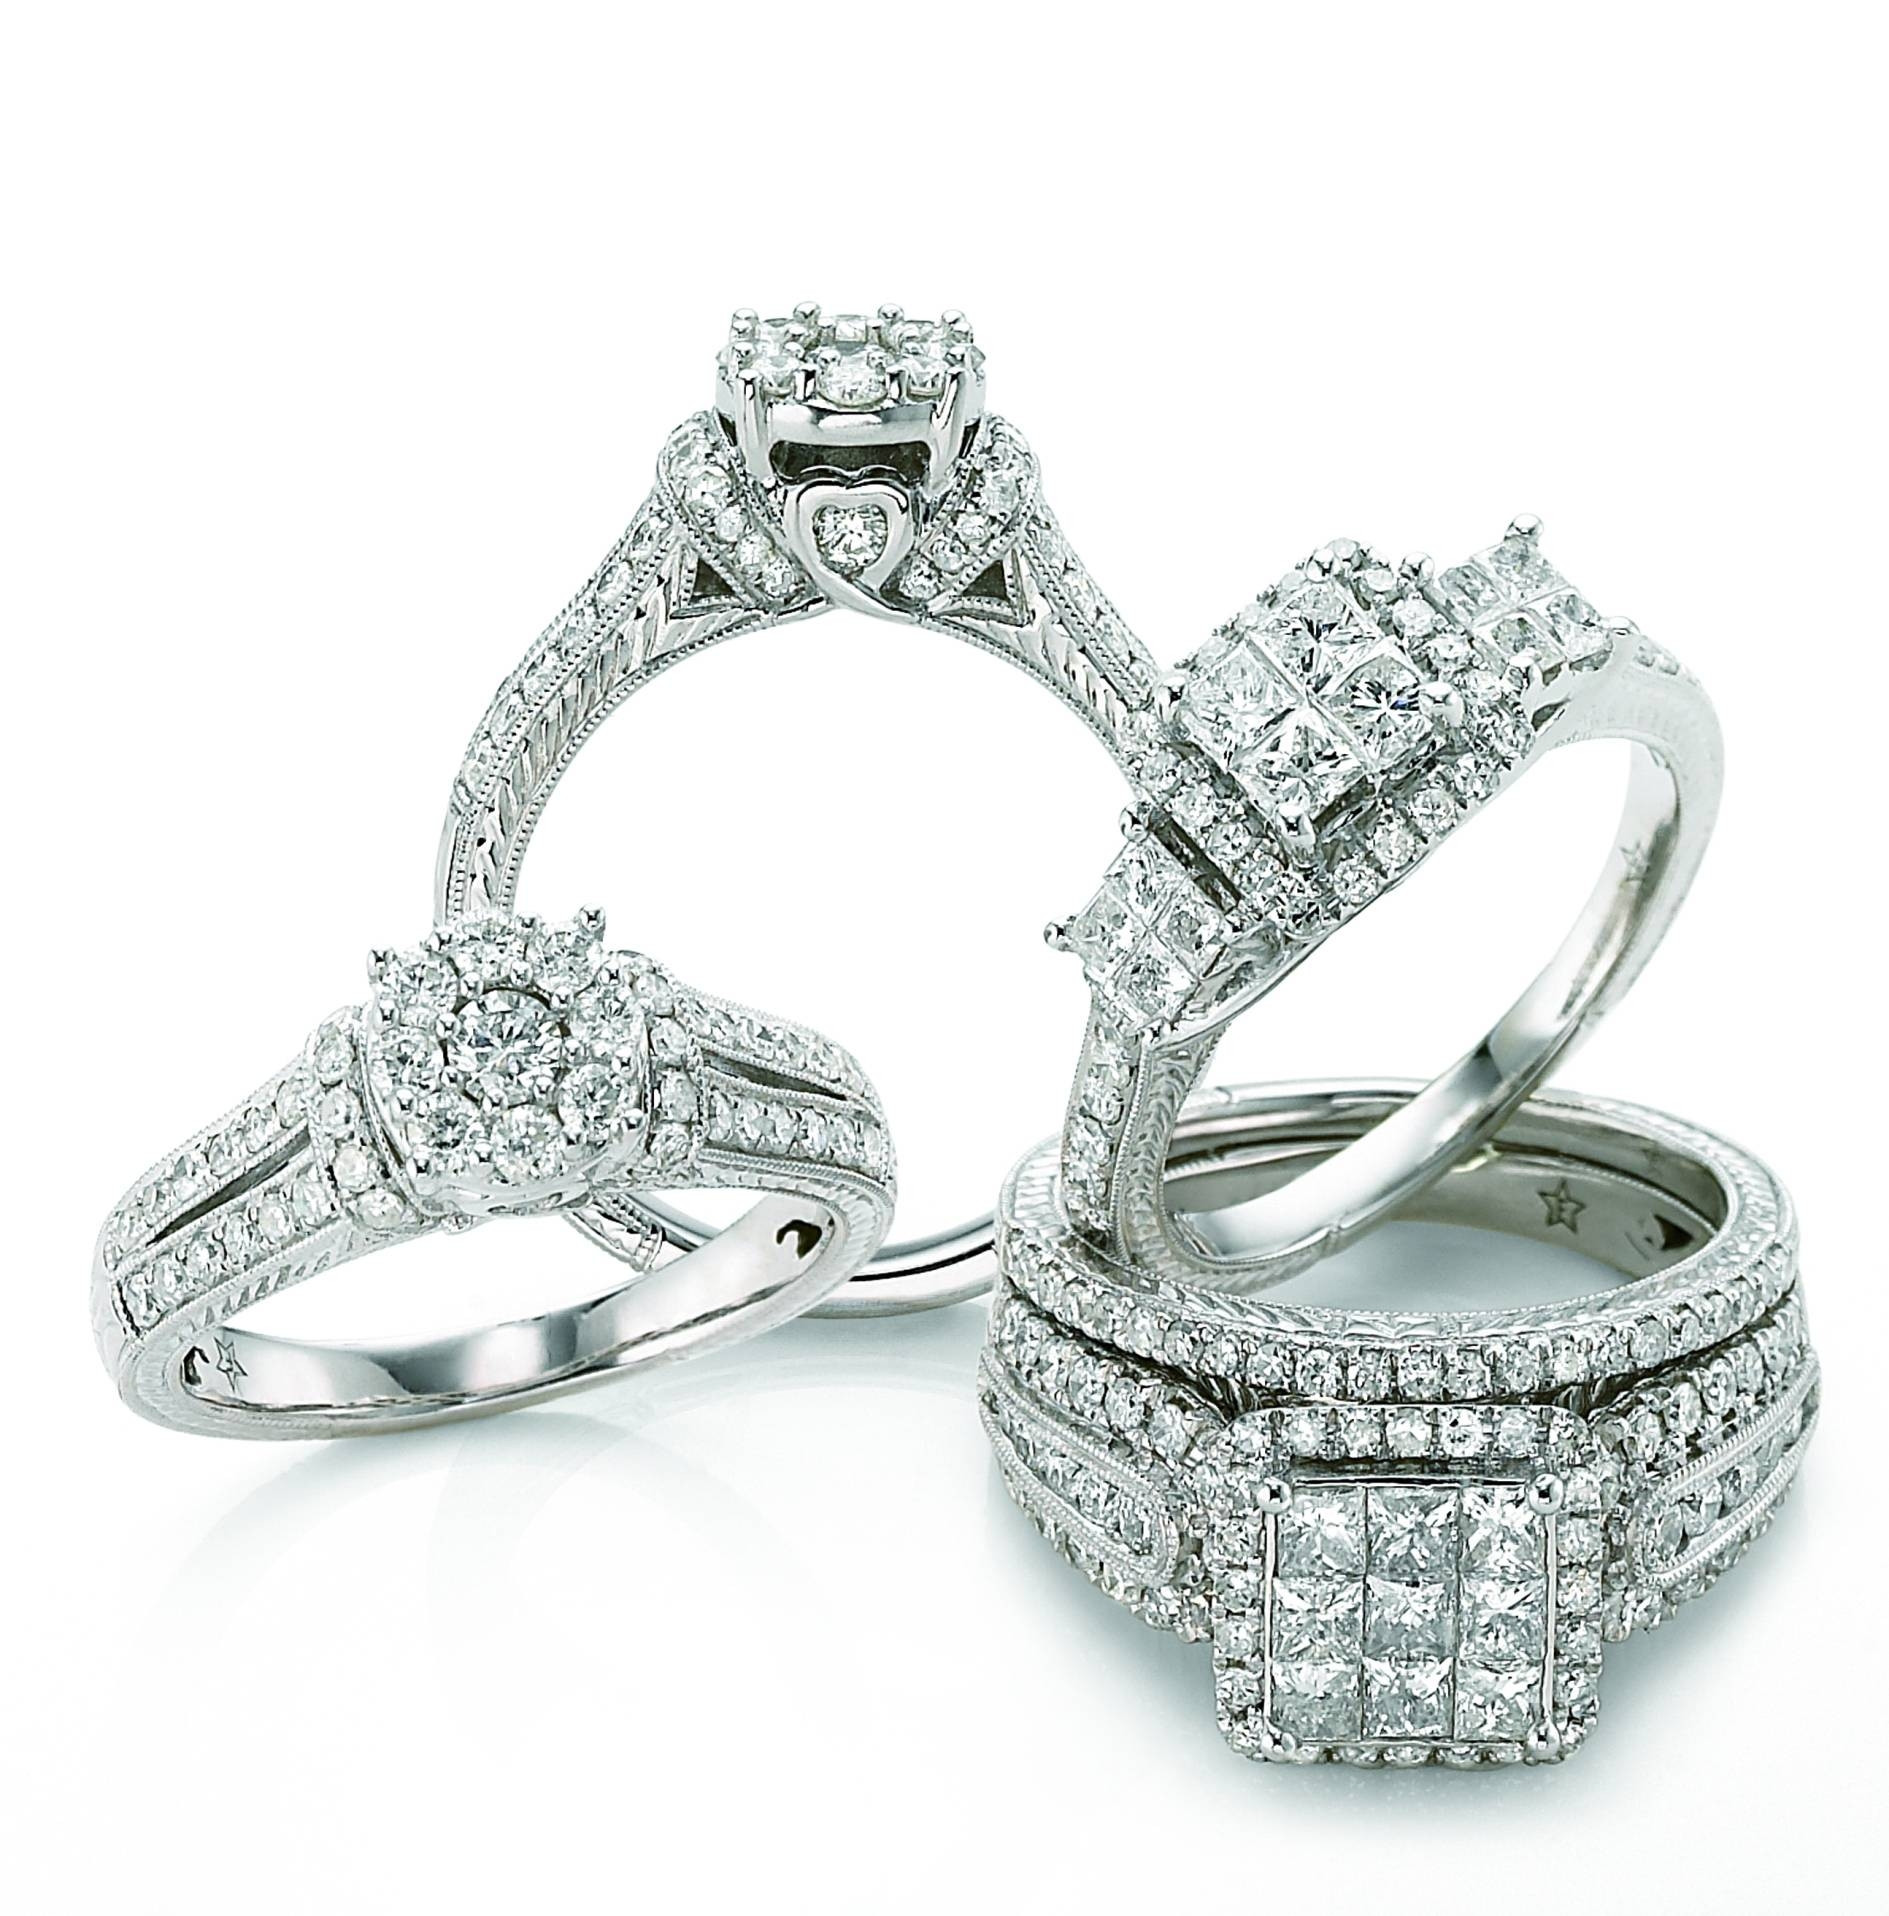 Jcpenney Wedding Ring Sets
 15 Best Collection of Jcpenney Jewelry Wedding Bands